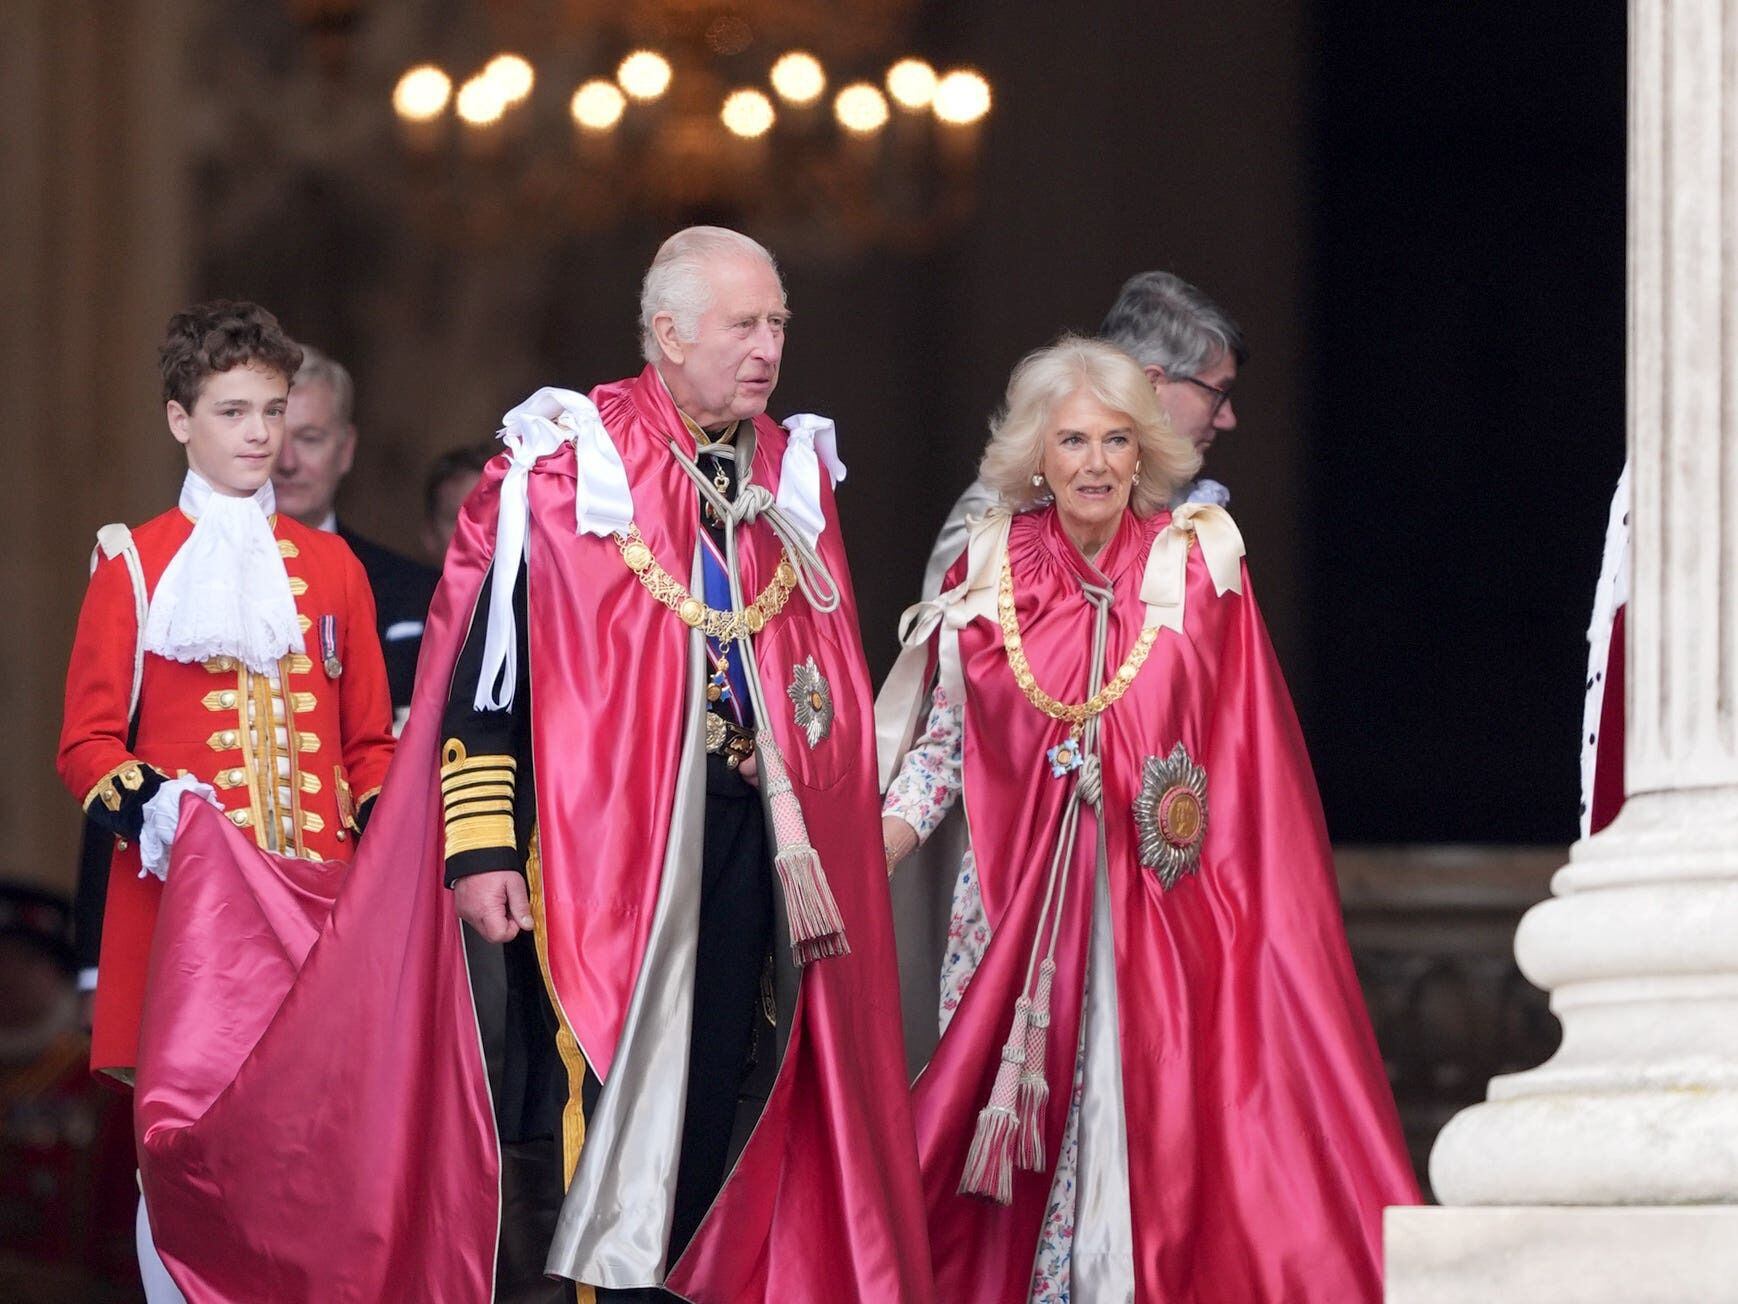 King joins throng of honour holders at service of dedication